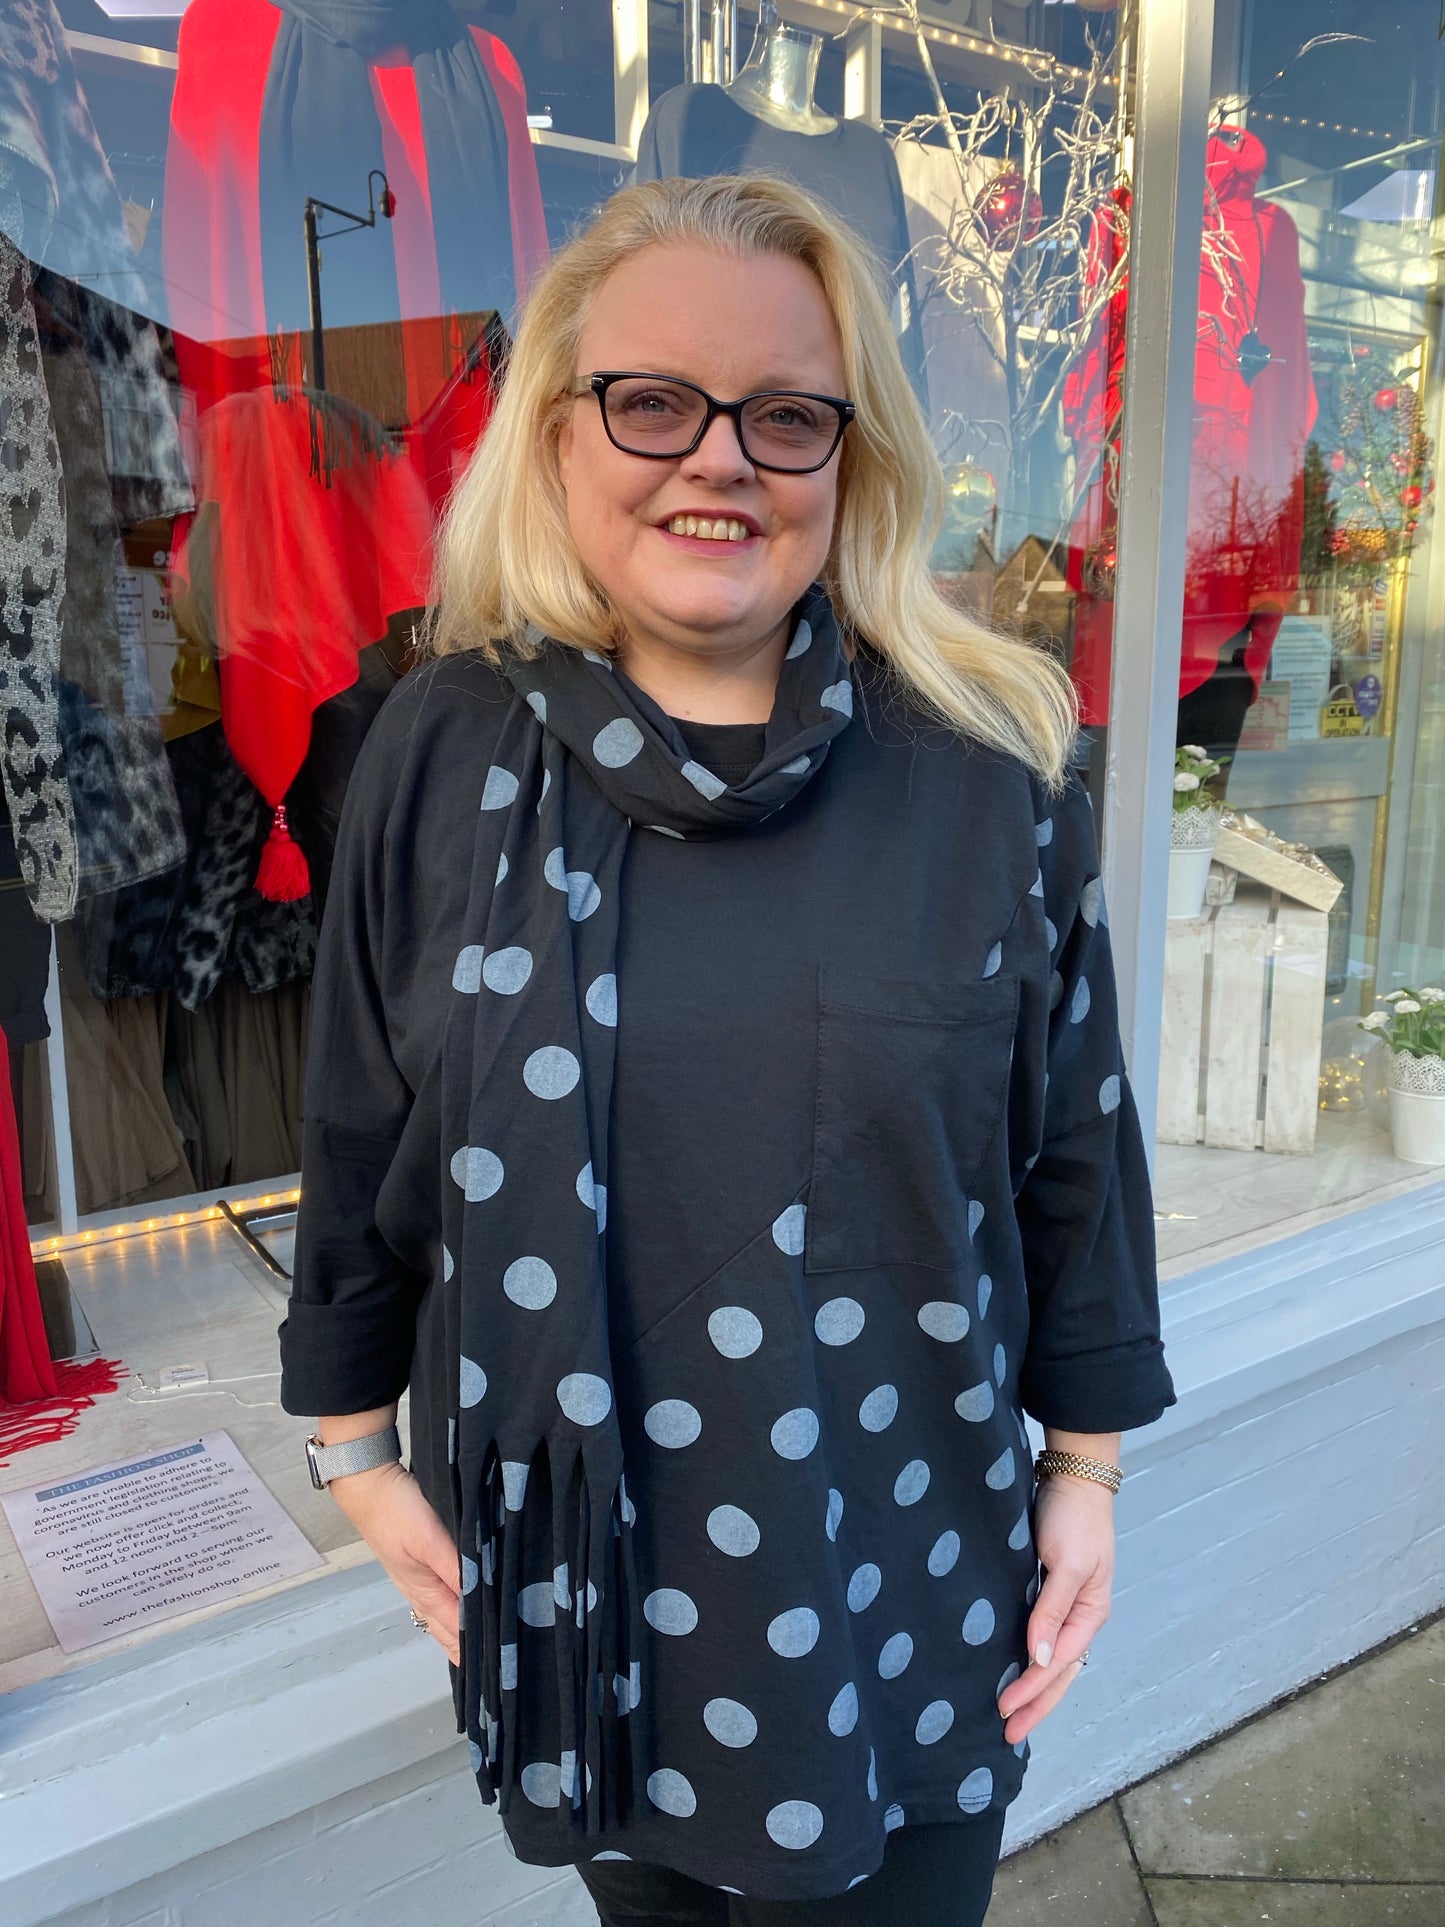 Black spotted top with scarf